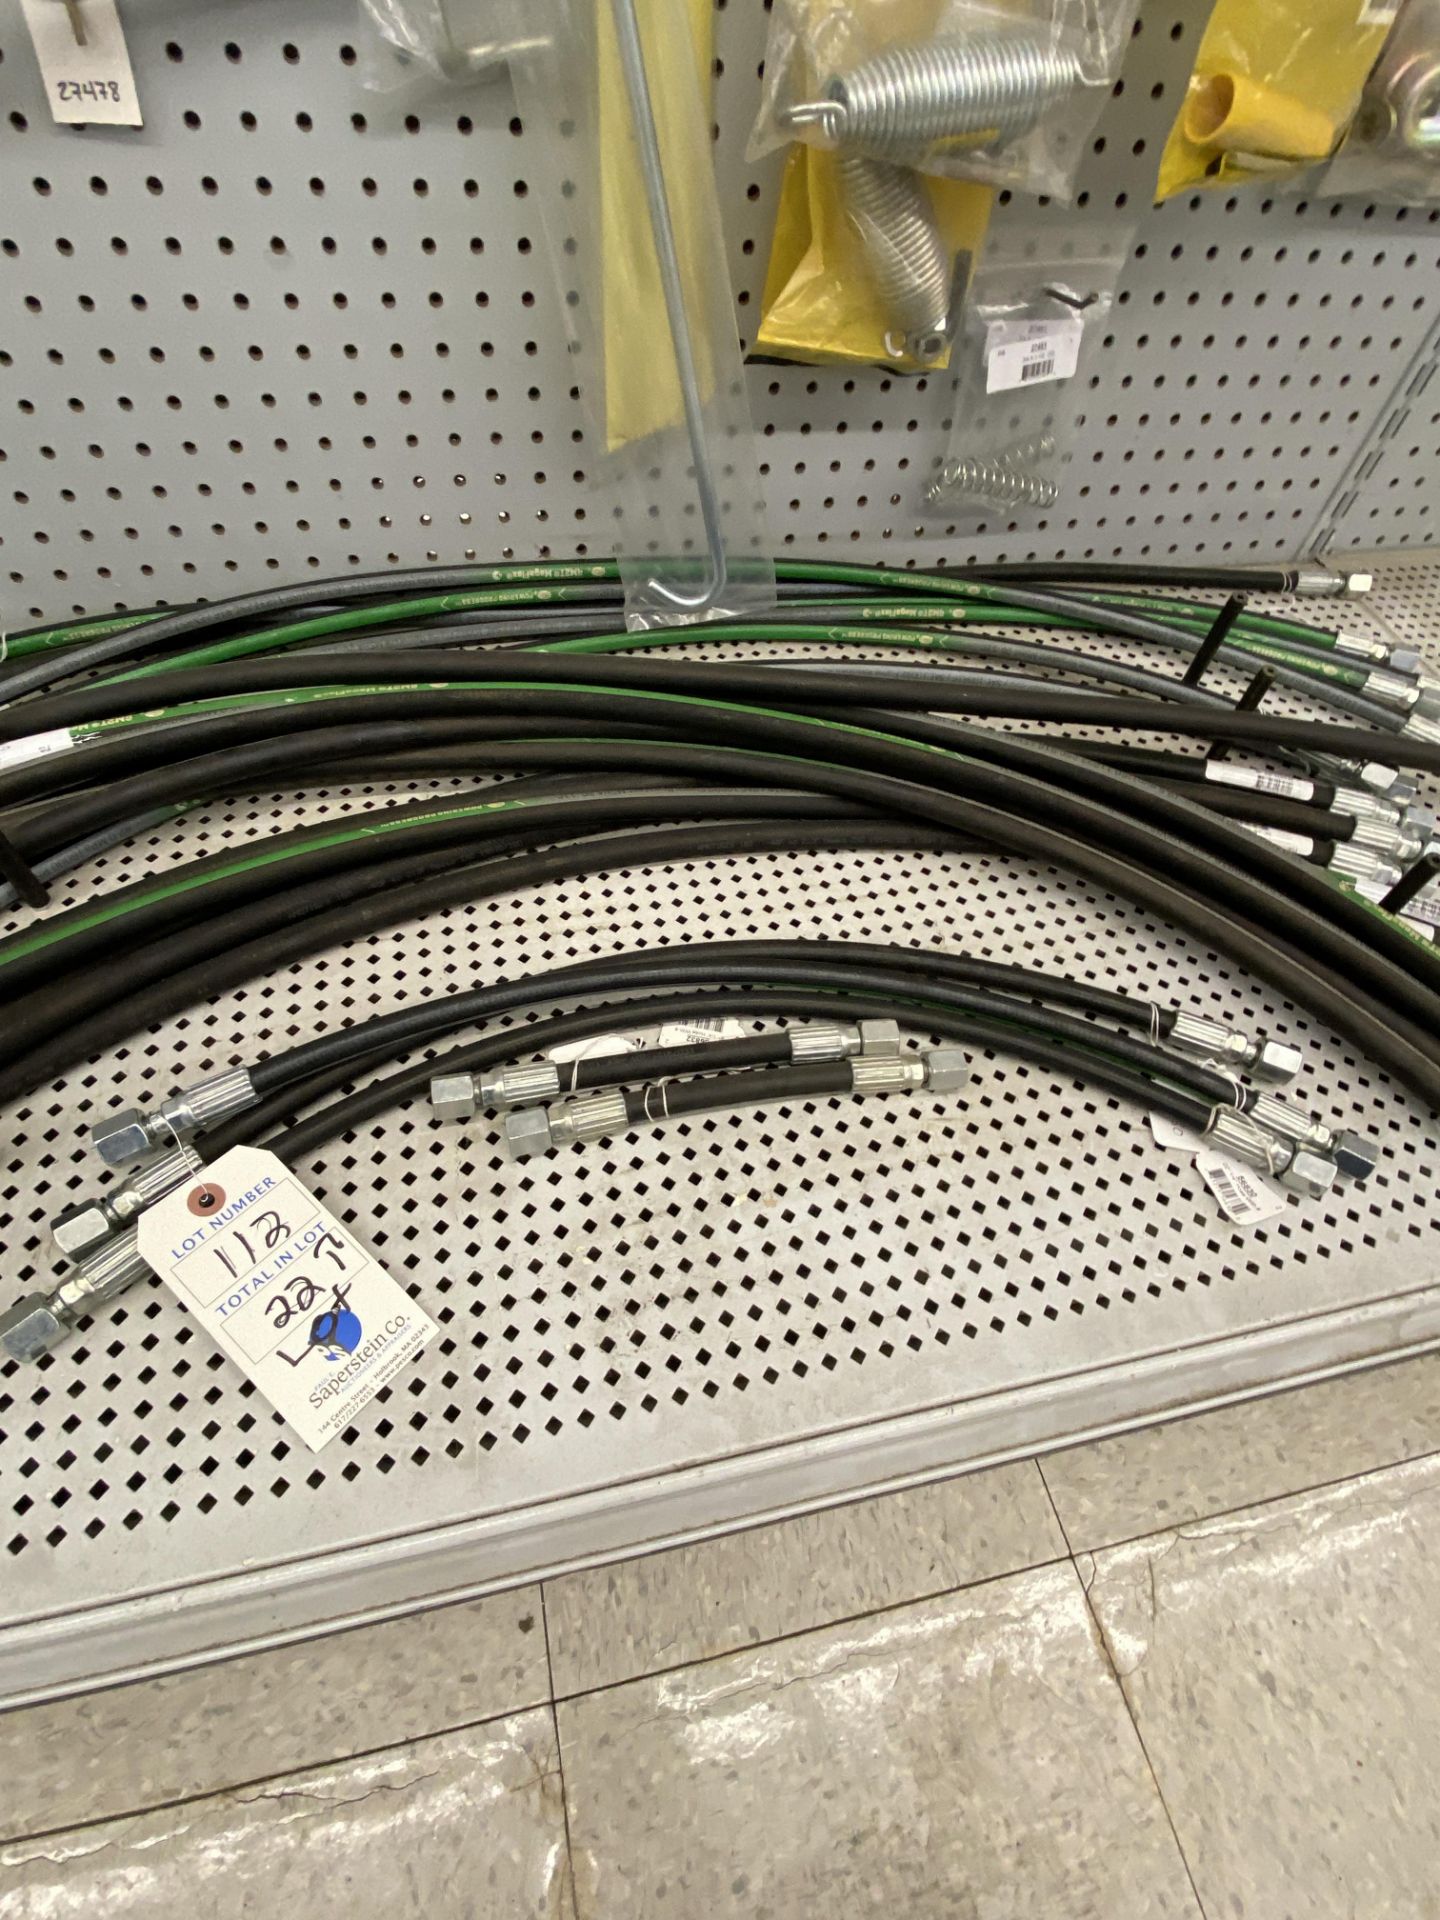 {LOT} (22) Asst. Fisher Hydraulic Hose for Lift and Angle Wholesale Value: 35 Each - Image 6 of 8